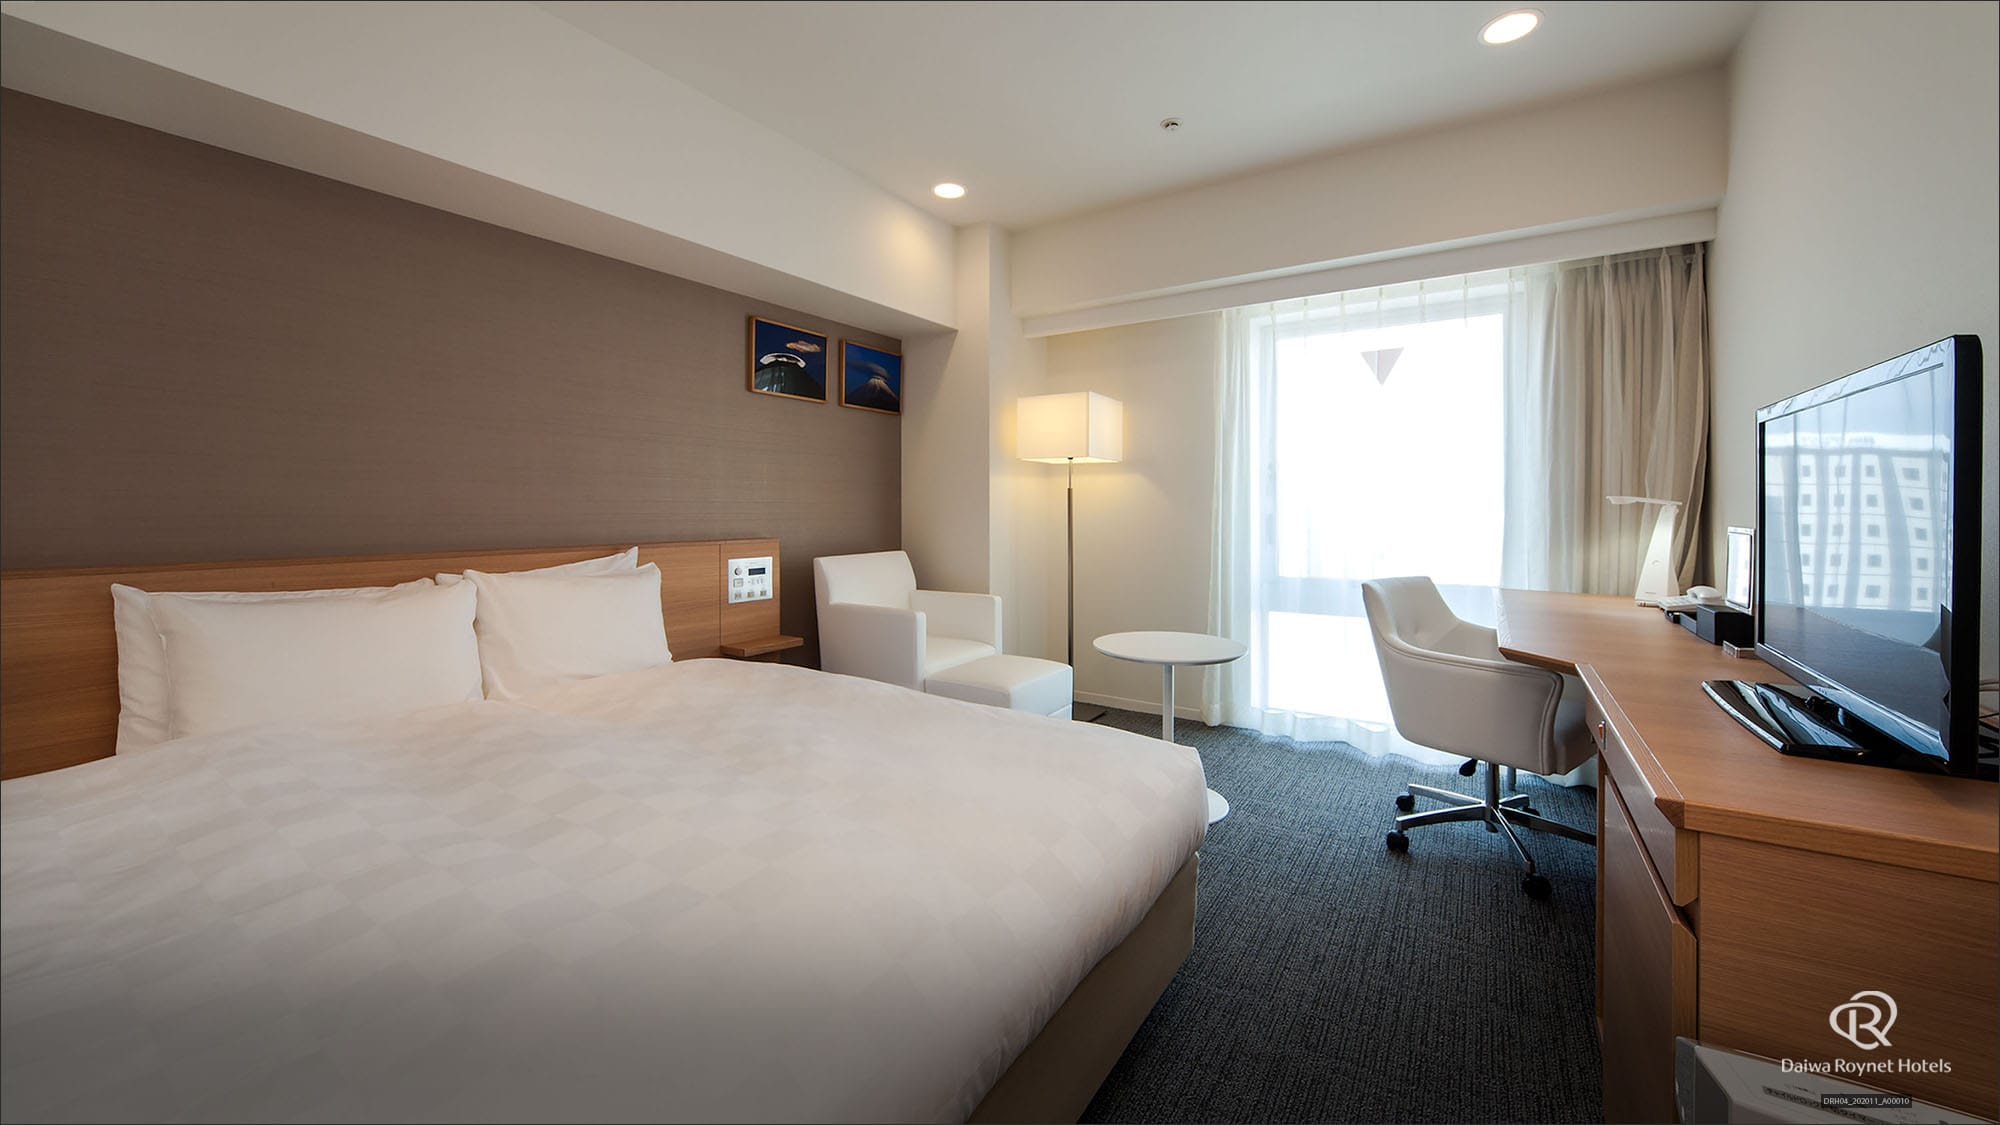 Moderate double room Room area: 26㎡ Bed size 168cm